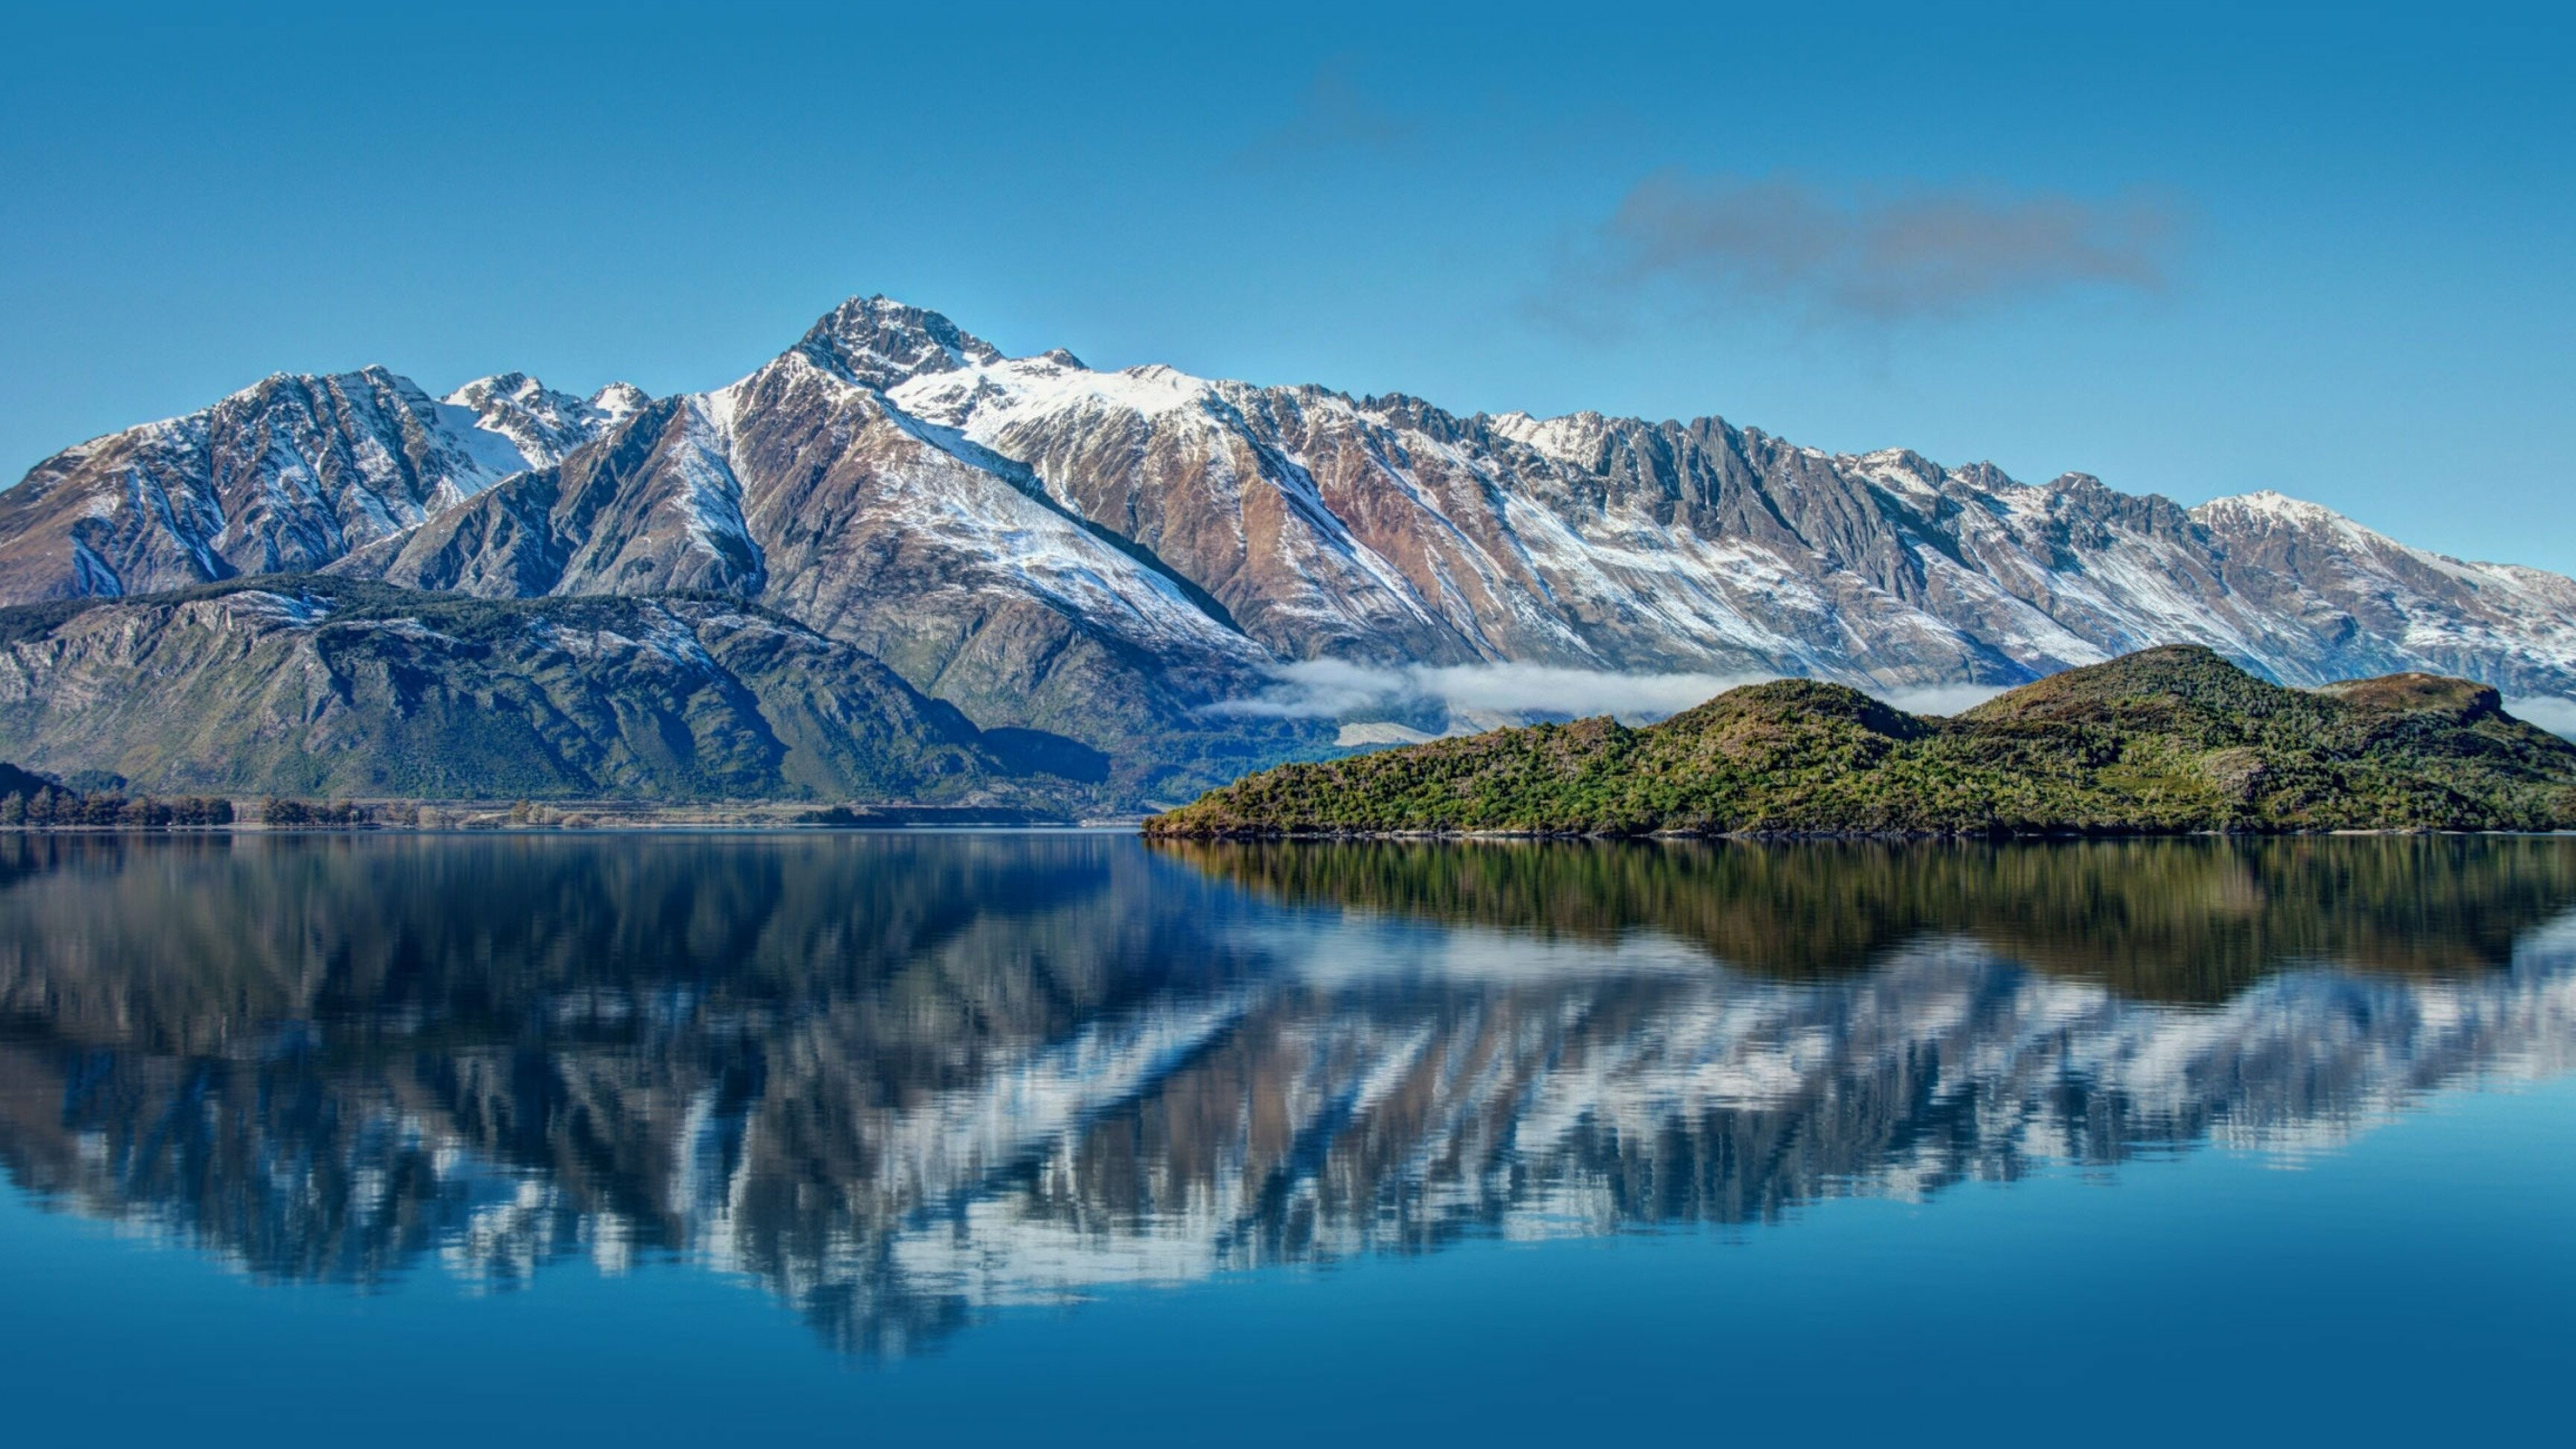 New Zealand: Pyramid Lake, The country's capital city is Wellington, and its most populous city is Auckland. 3840x2160 4K Wallpaper.